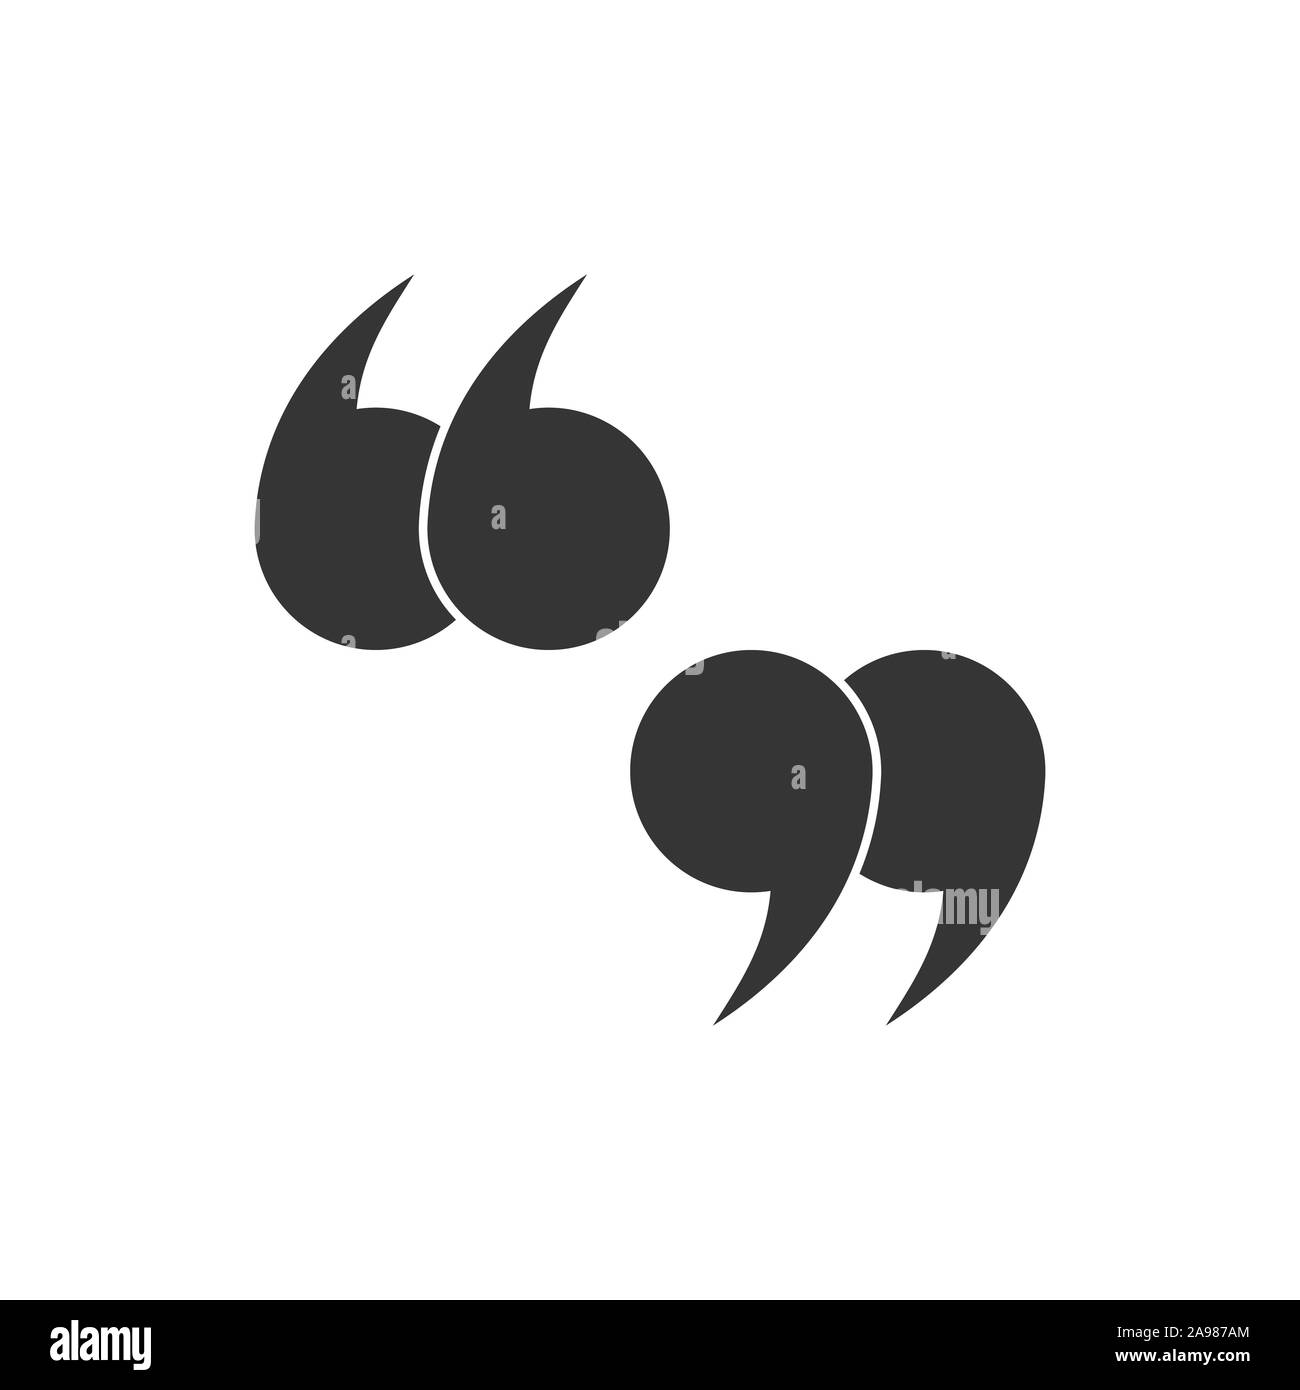 Double quote mark icon. Vector icons. Left and right quote mark. Quotation mark symbols Stock Vector